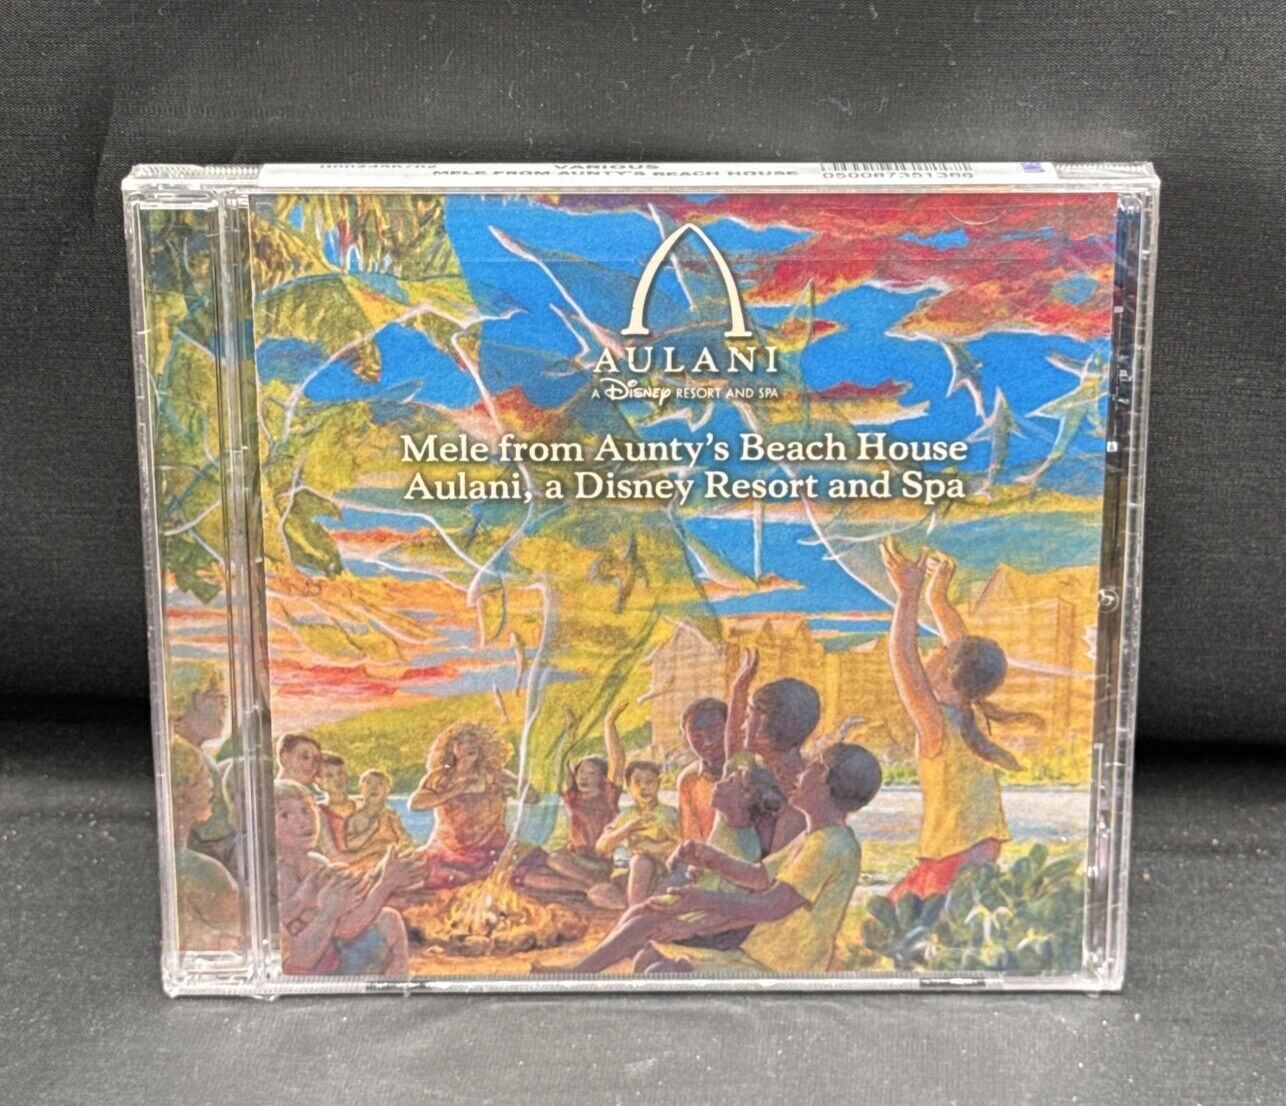 Mele from Aunty's Beach House Aulani, a Disney Resort and Spa CD New